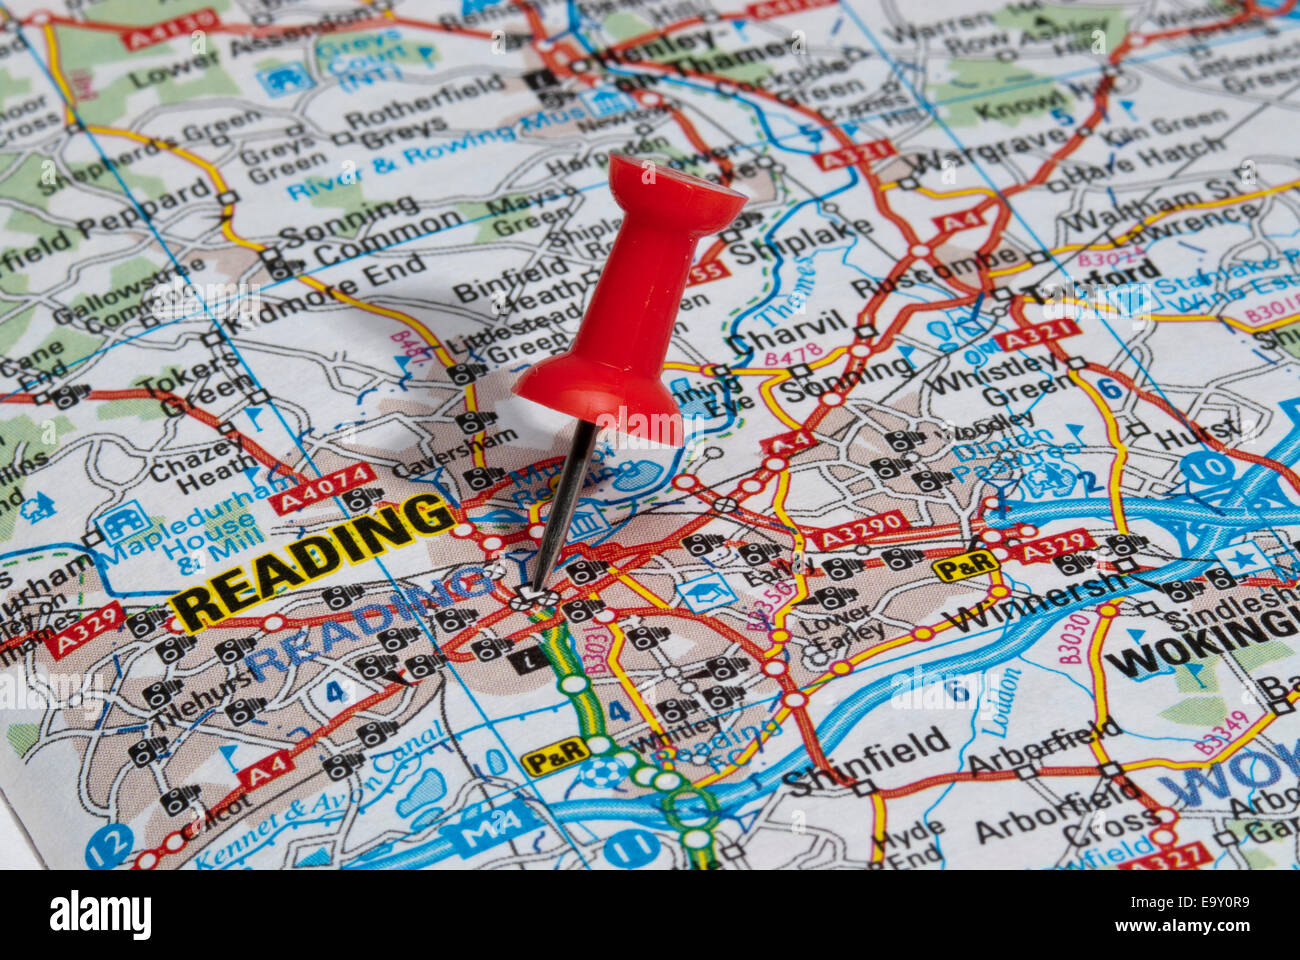 red map pin in road map pointing to city of Reading Stock Photo